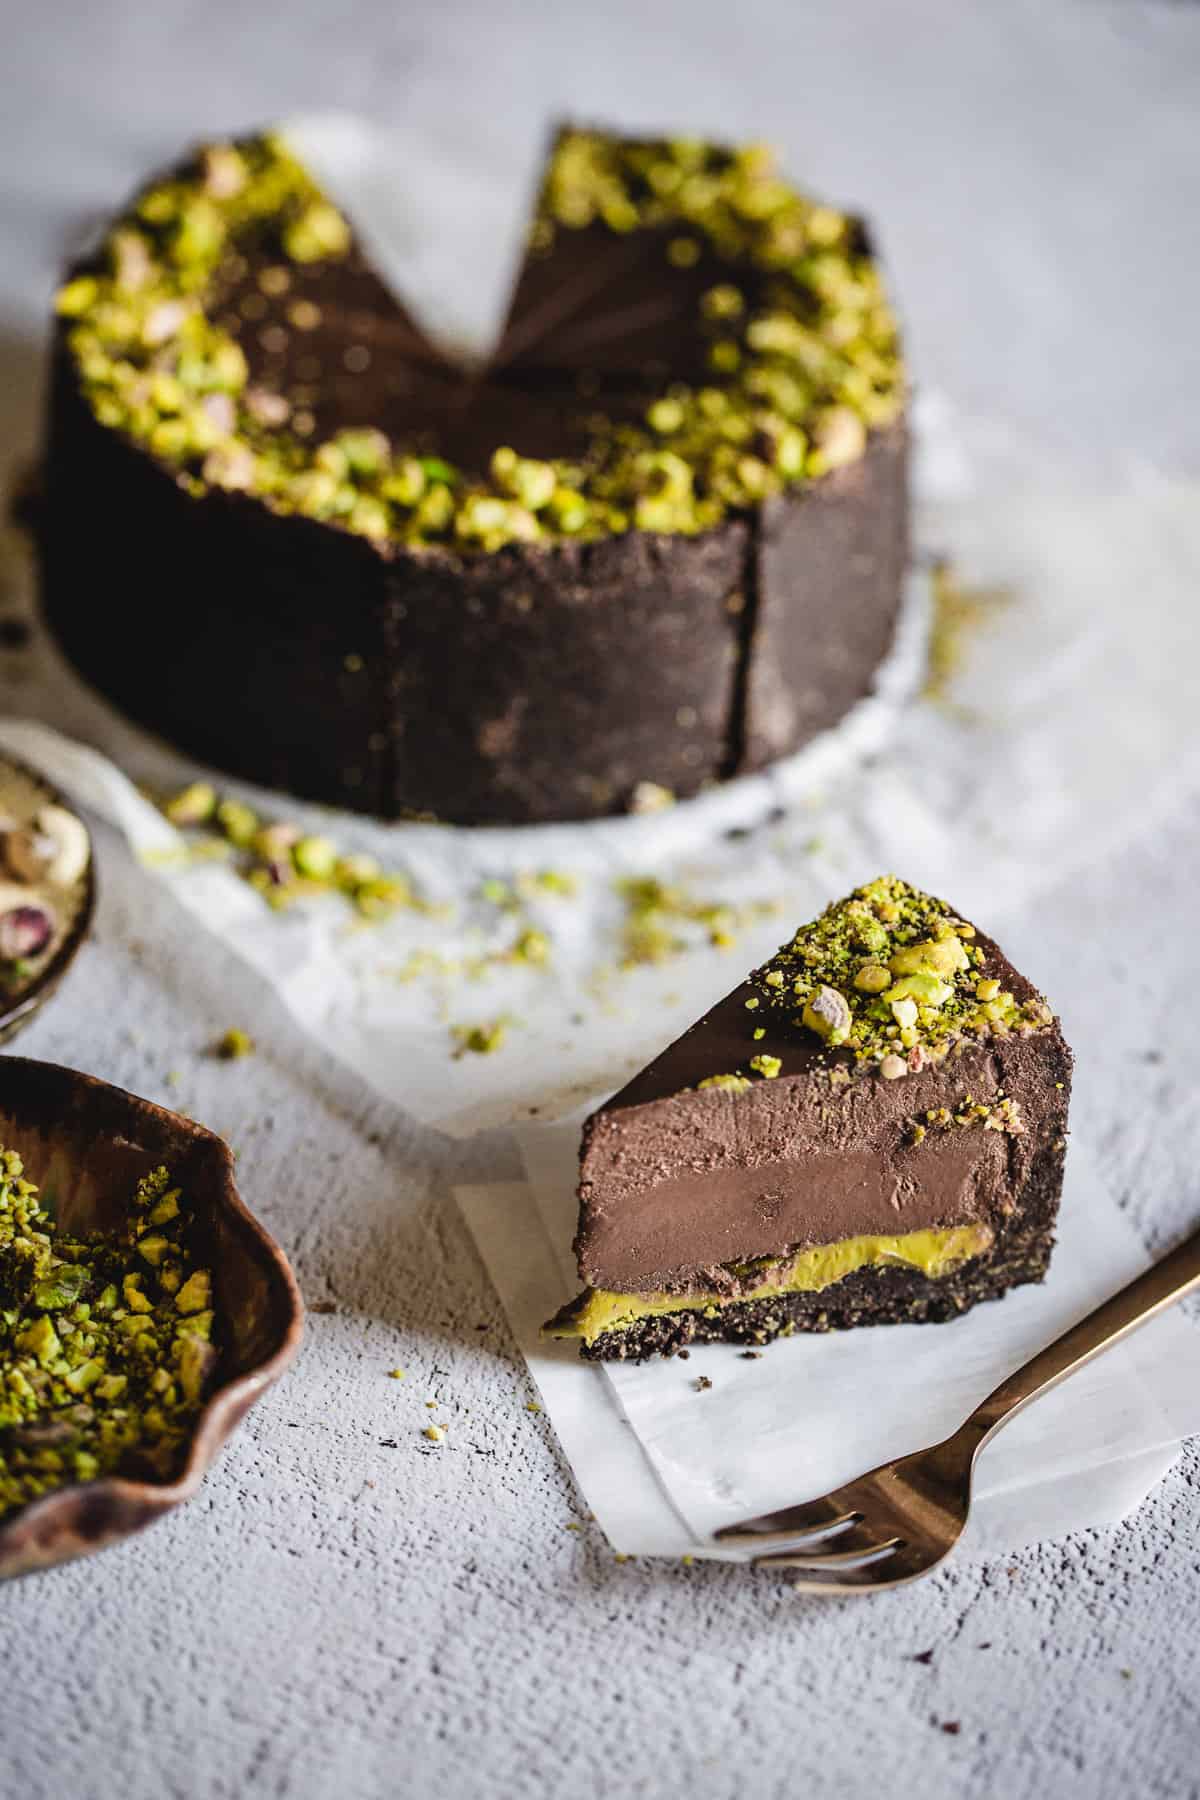 one slice and fork in front of chocolate pistachio cake